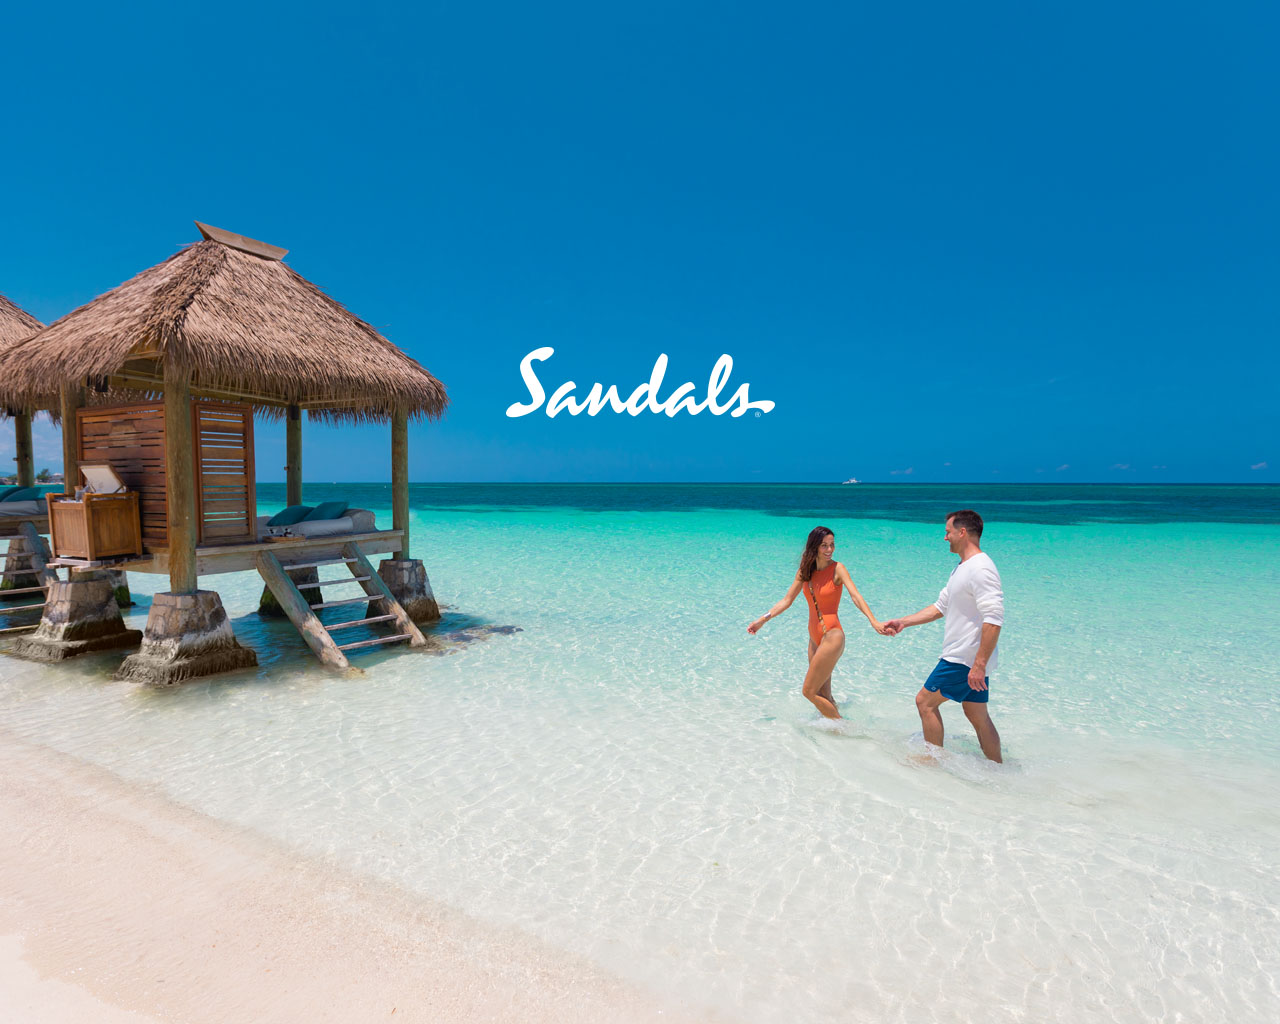 Save £100 off Sandals and Beaches Resort holidays with Black Friday  discount | Travel News | Travel | Express.co.uk